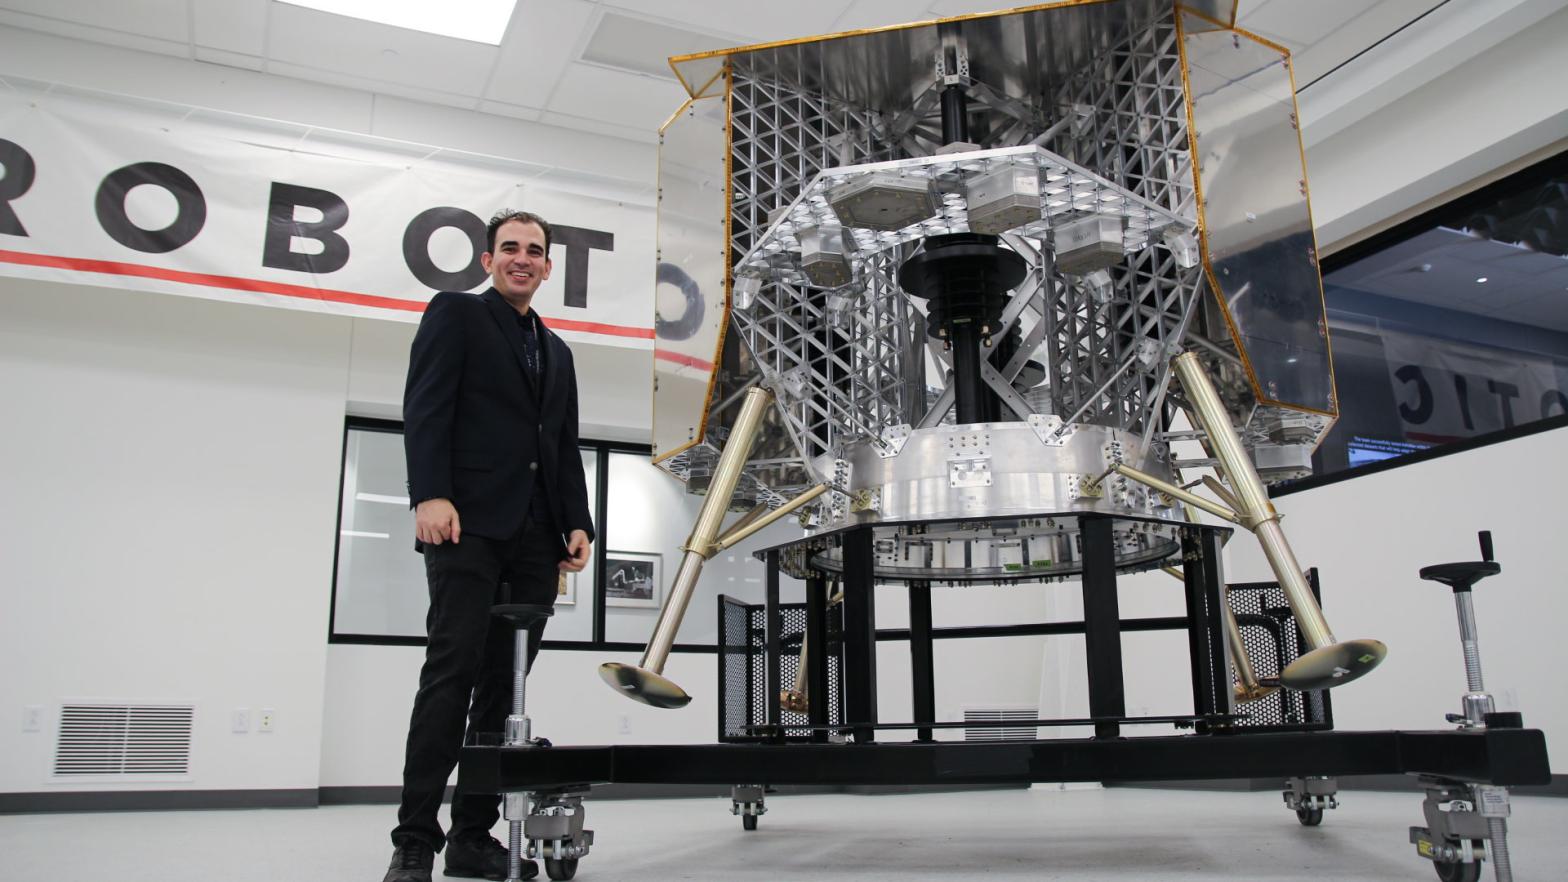 Astrobotic systems engineer Ander Solorzano stands beside a test model of the company's Peregrine lunar lander currently in development. It's set to be the first American lander on the Moon since the Apollo missions. (Photo: Astrobotic)